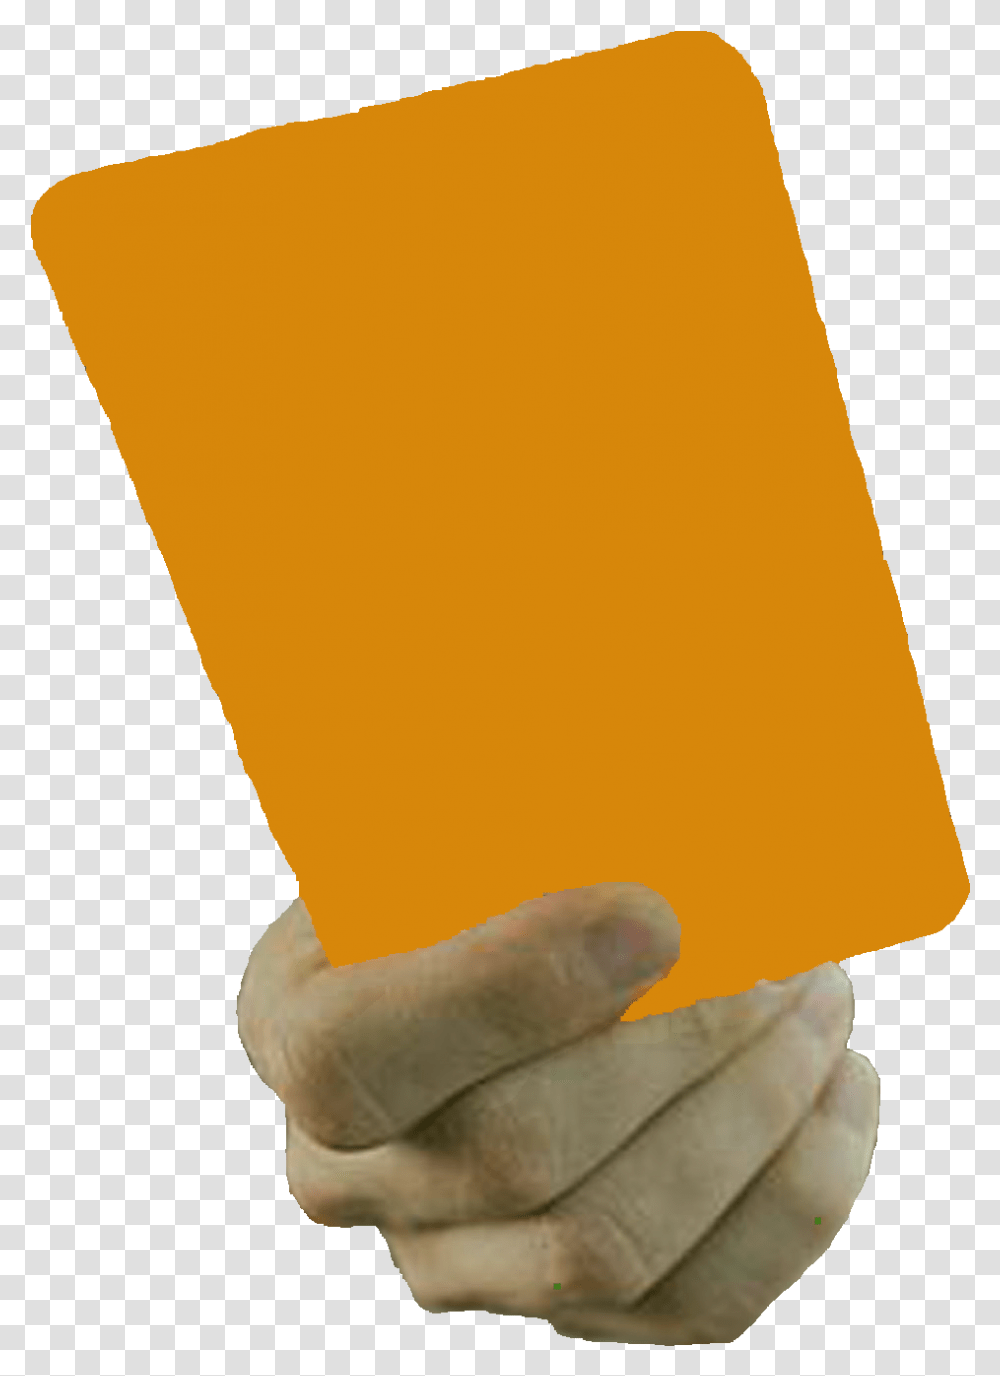 Refree Yellow Card Download Referee Yellow Card, Juice, Beverage, Bottle, Food Transparent Png